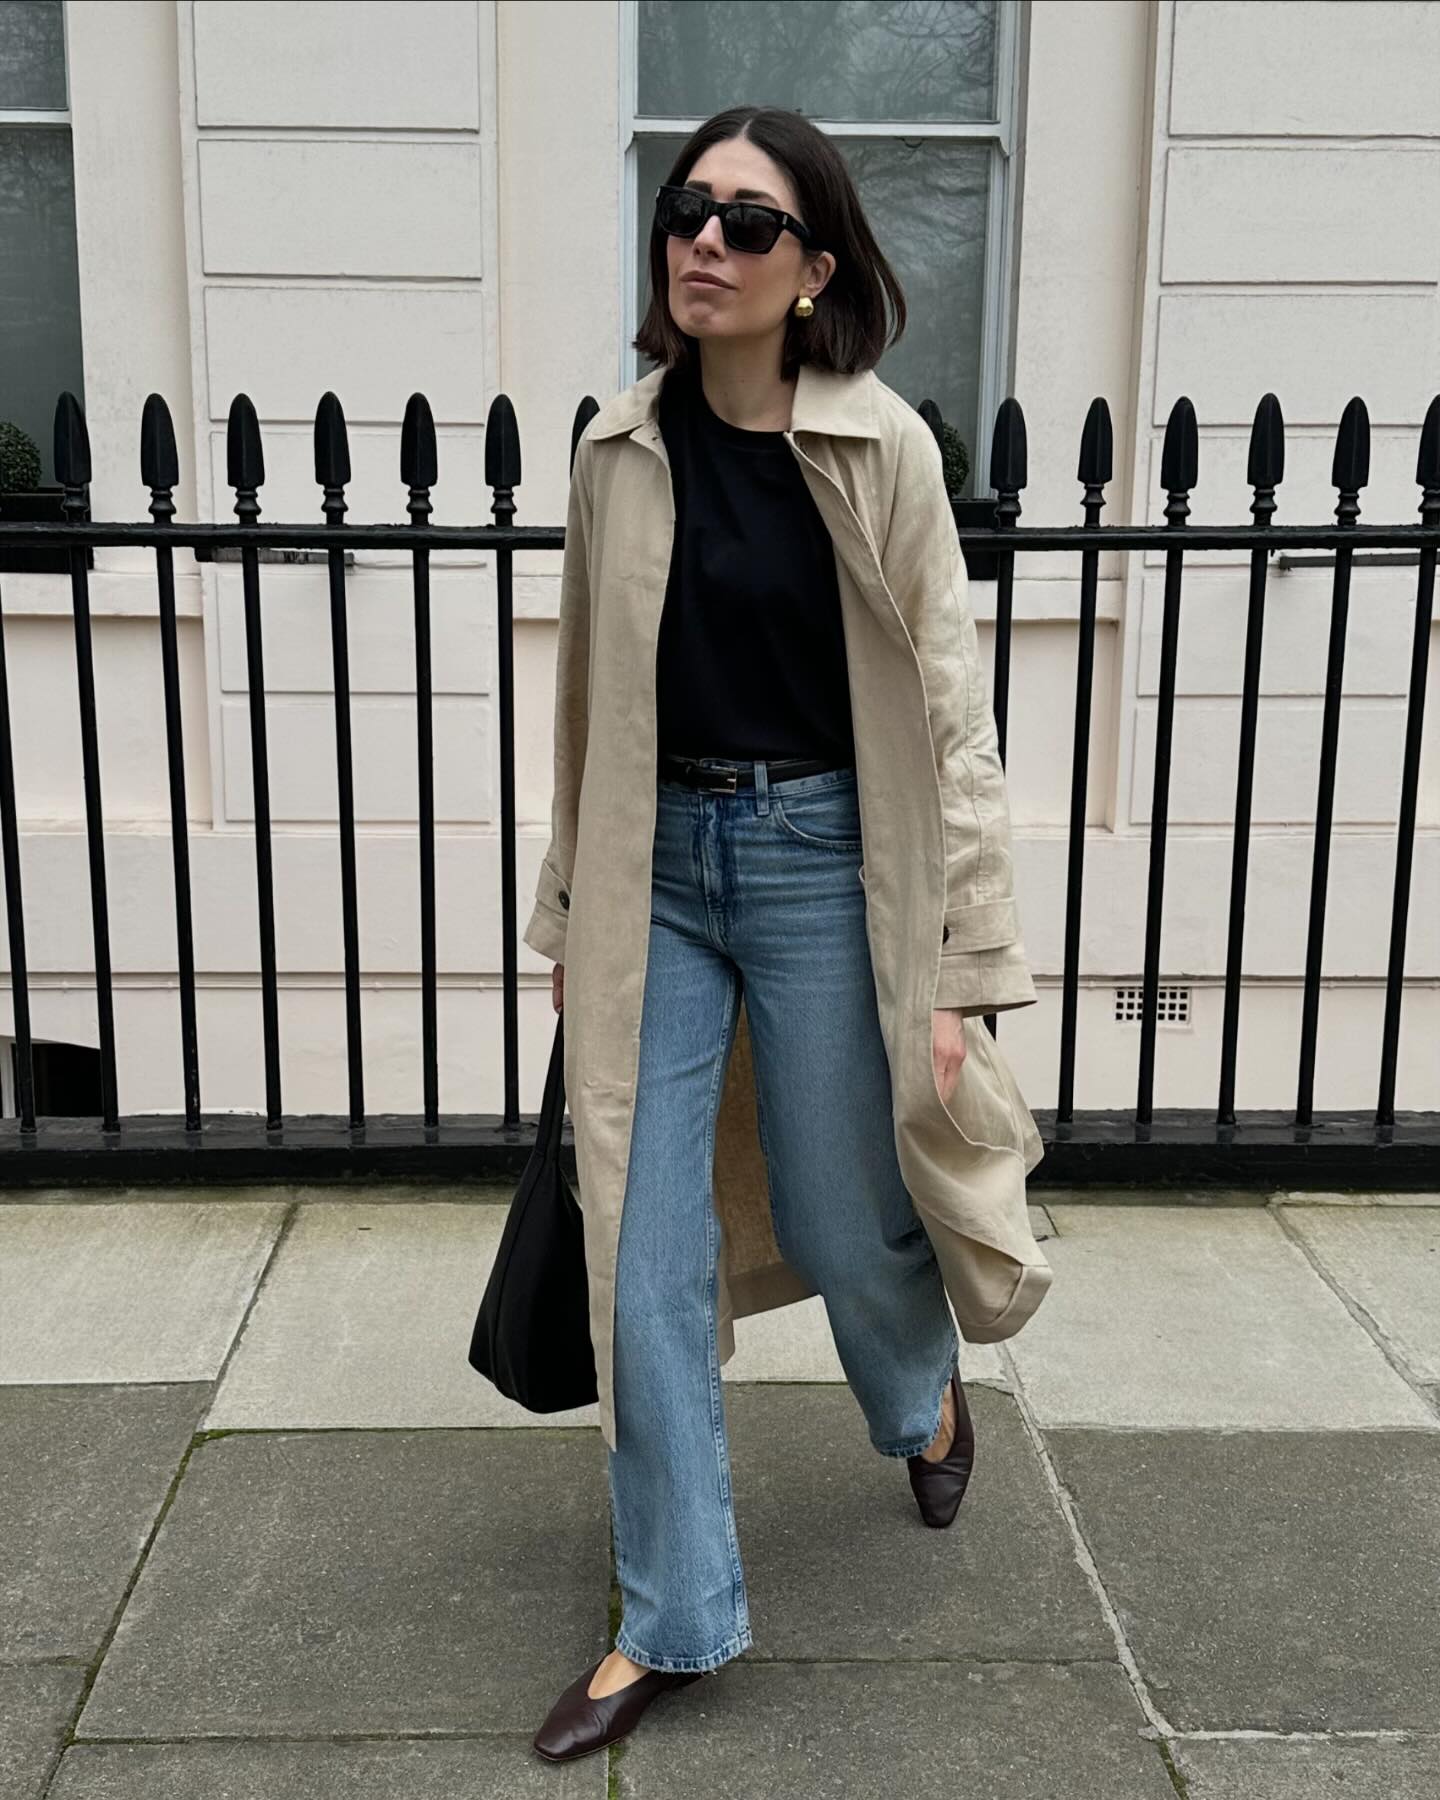 stylish influencer Lucy Alston walking on a sidewalk in London wearing a line trench coat, black top, straight-leg jeans, and brown flats